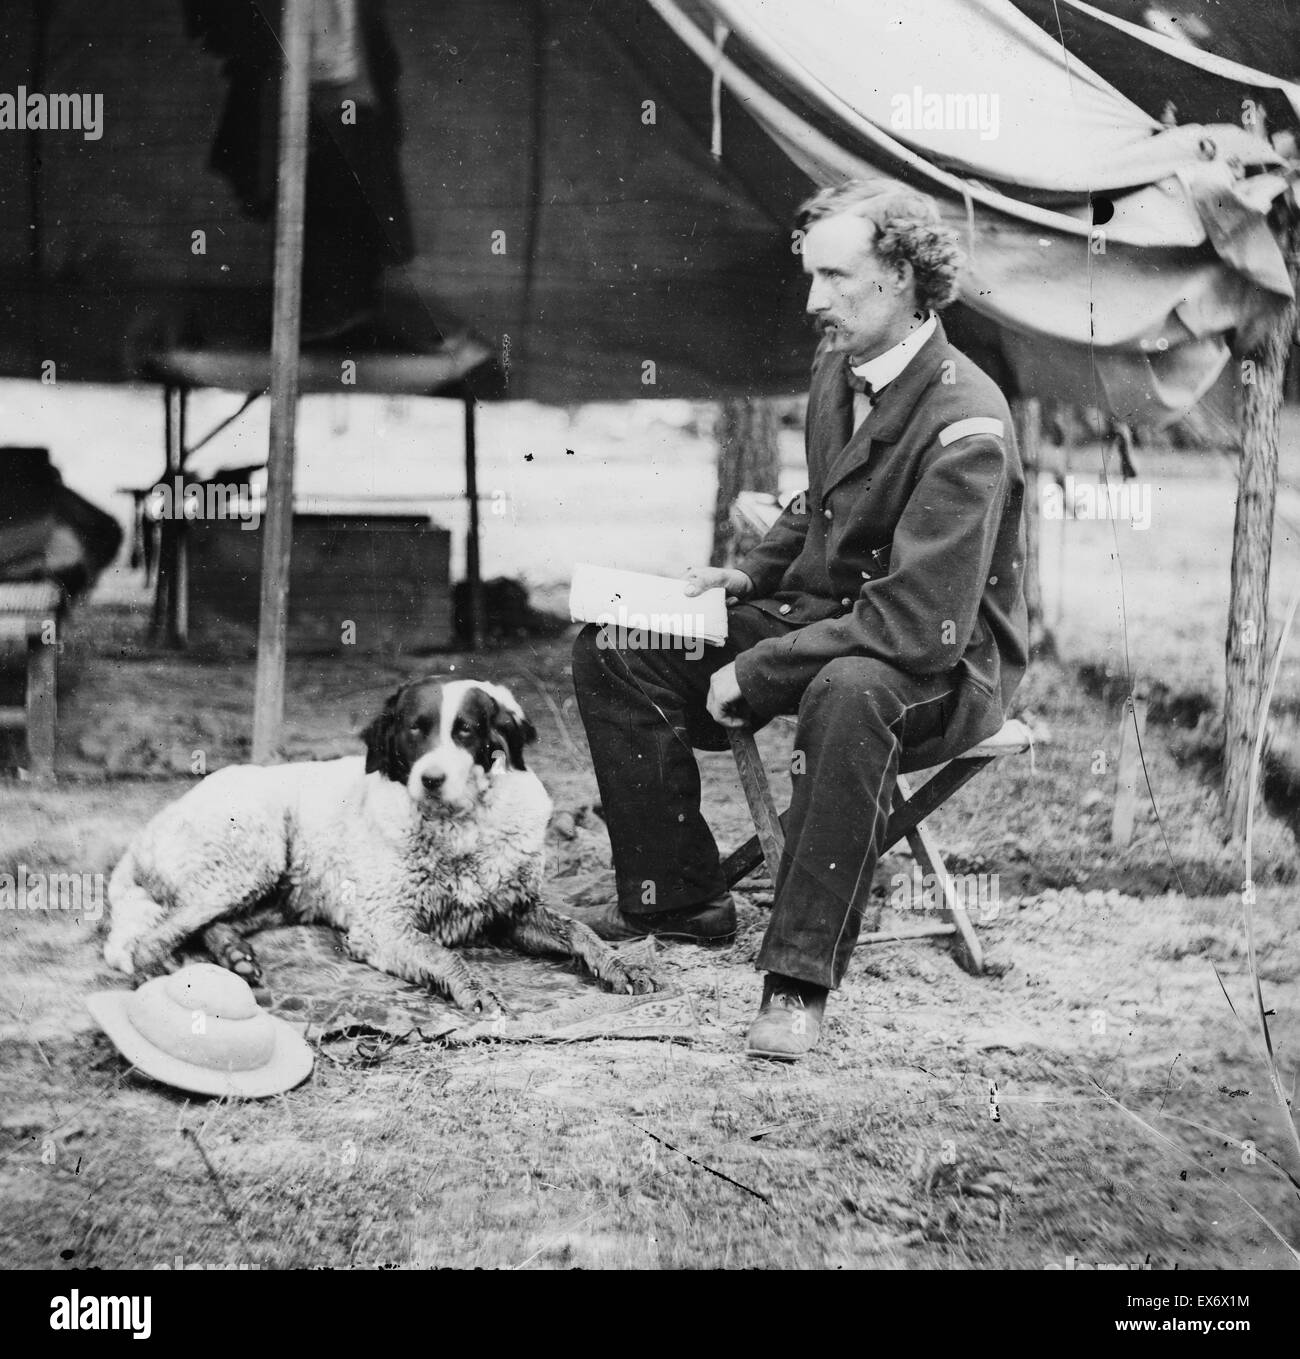 Photographic print of Cavalry Commander George Armstrong Custer (1839-1876) with his dog during the American Civil War. Raised in Michigan and Ohio, Custer was admitted to West Point in 1858, where he graduated last in his class. With the outbreak of the Stock Photo